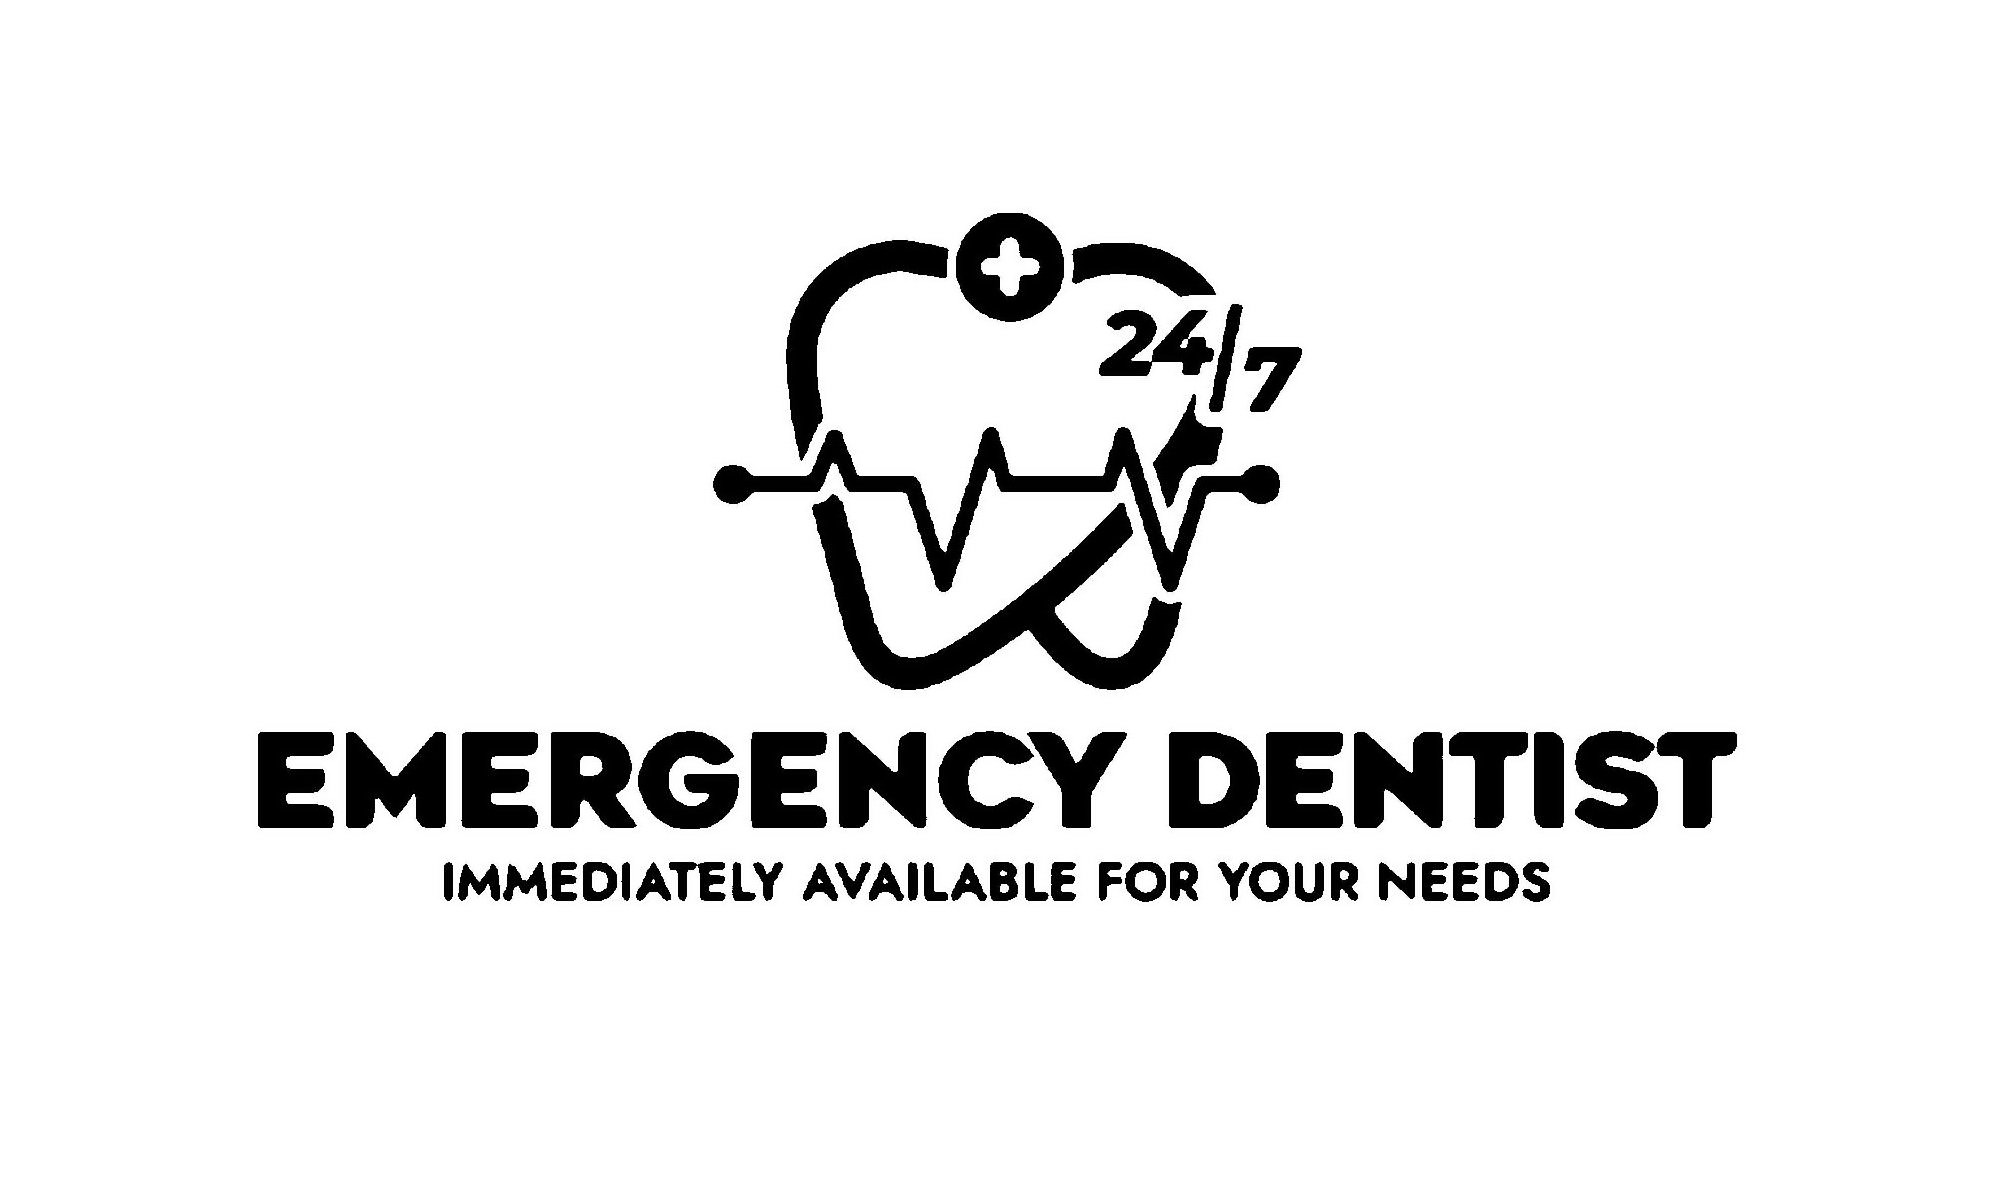  EMERGENCY DENTIST 24/7 IMMEDIATELY AVAILABLE FOR YOUR NEEDS